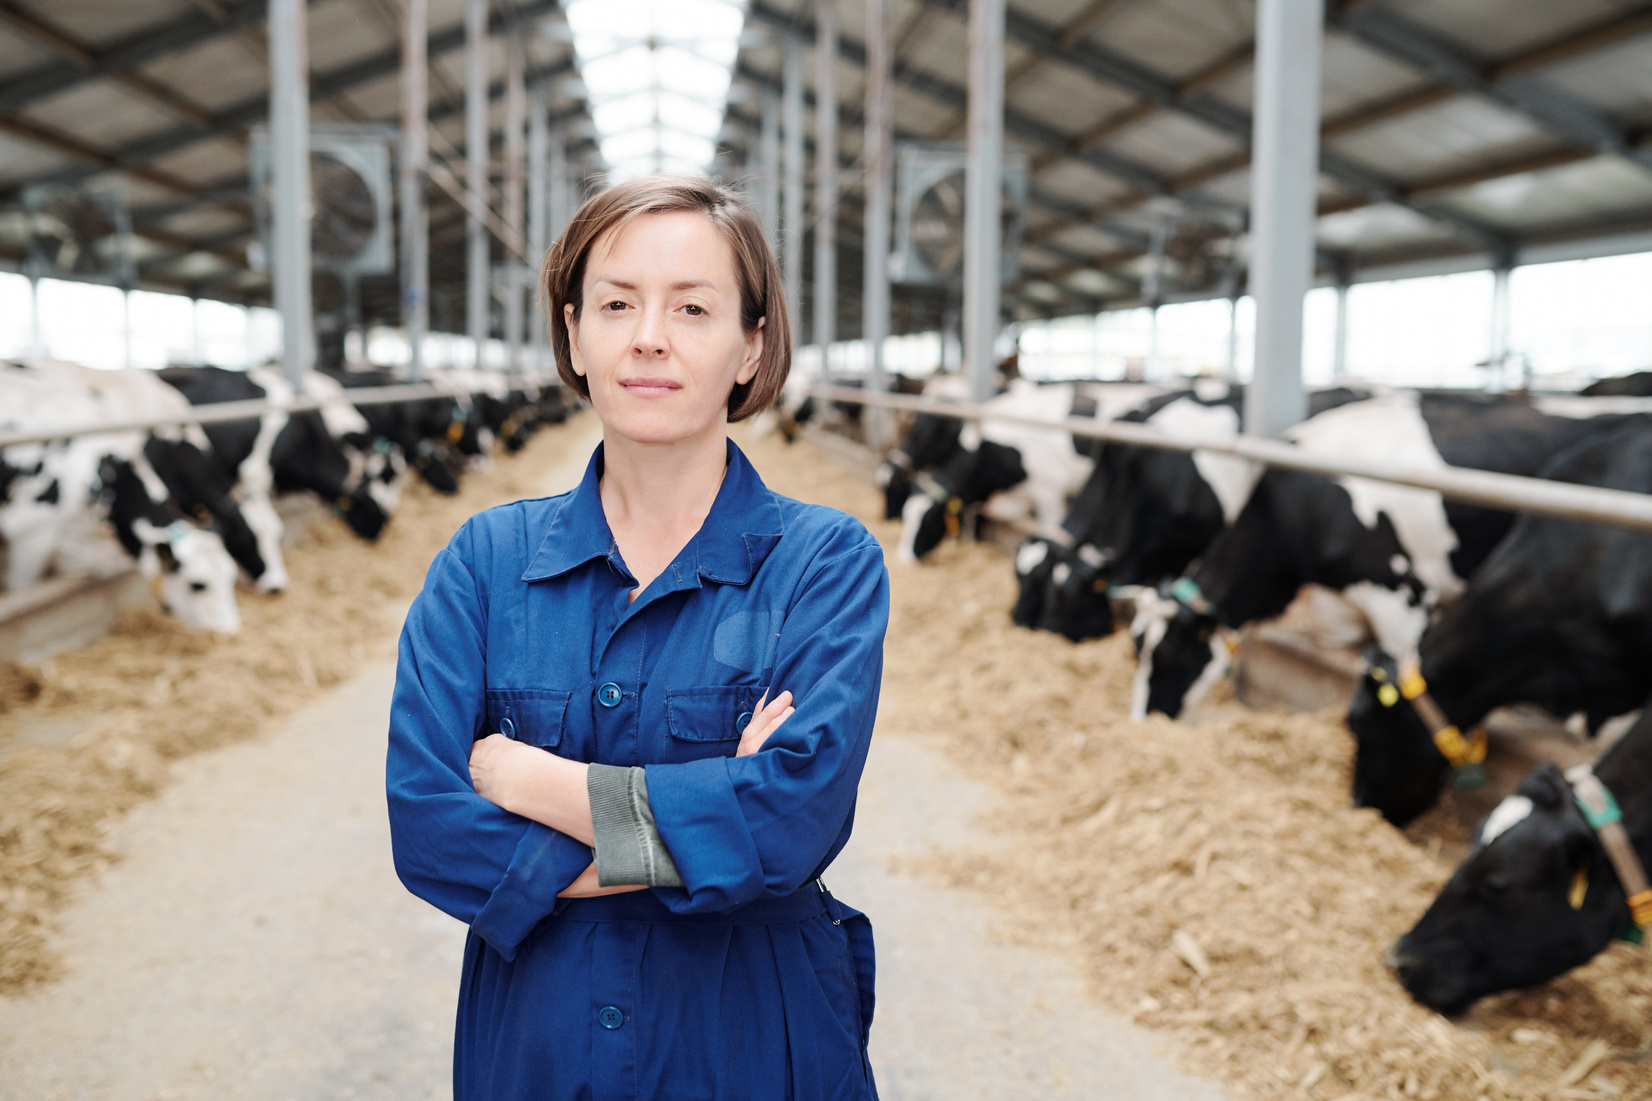 Woman Working at Dairy Farm